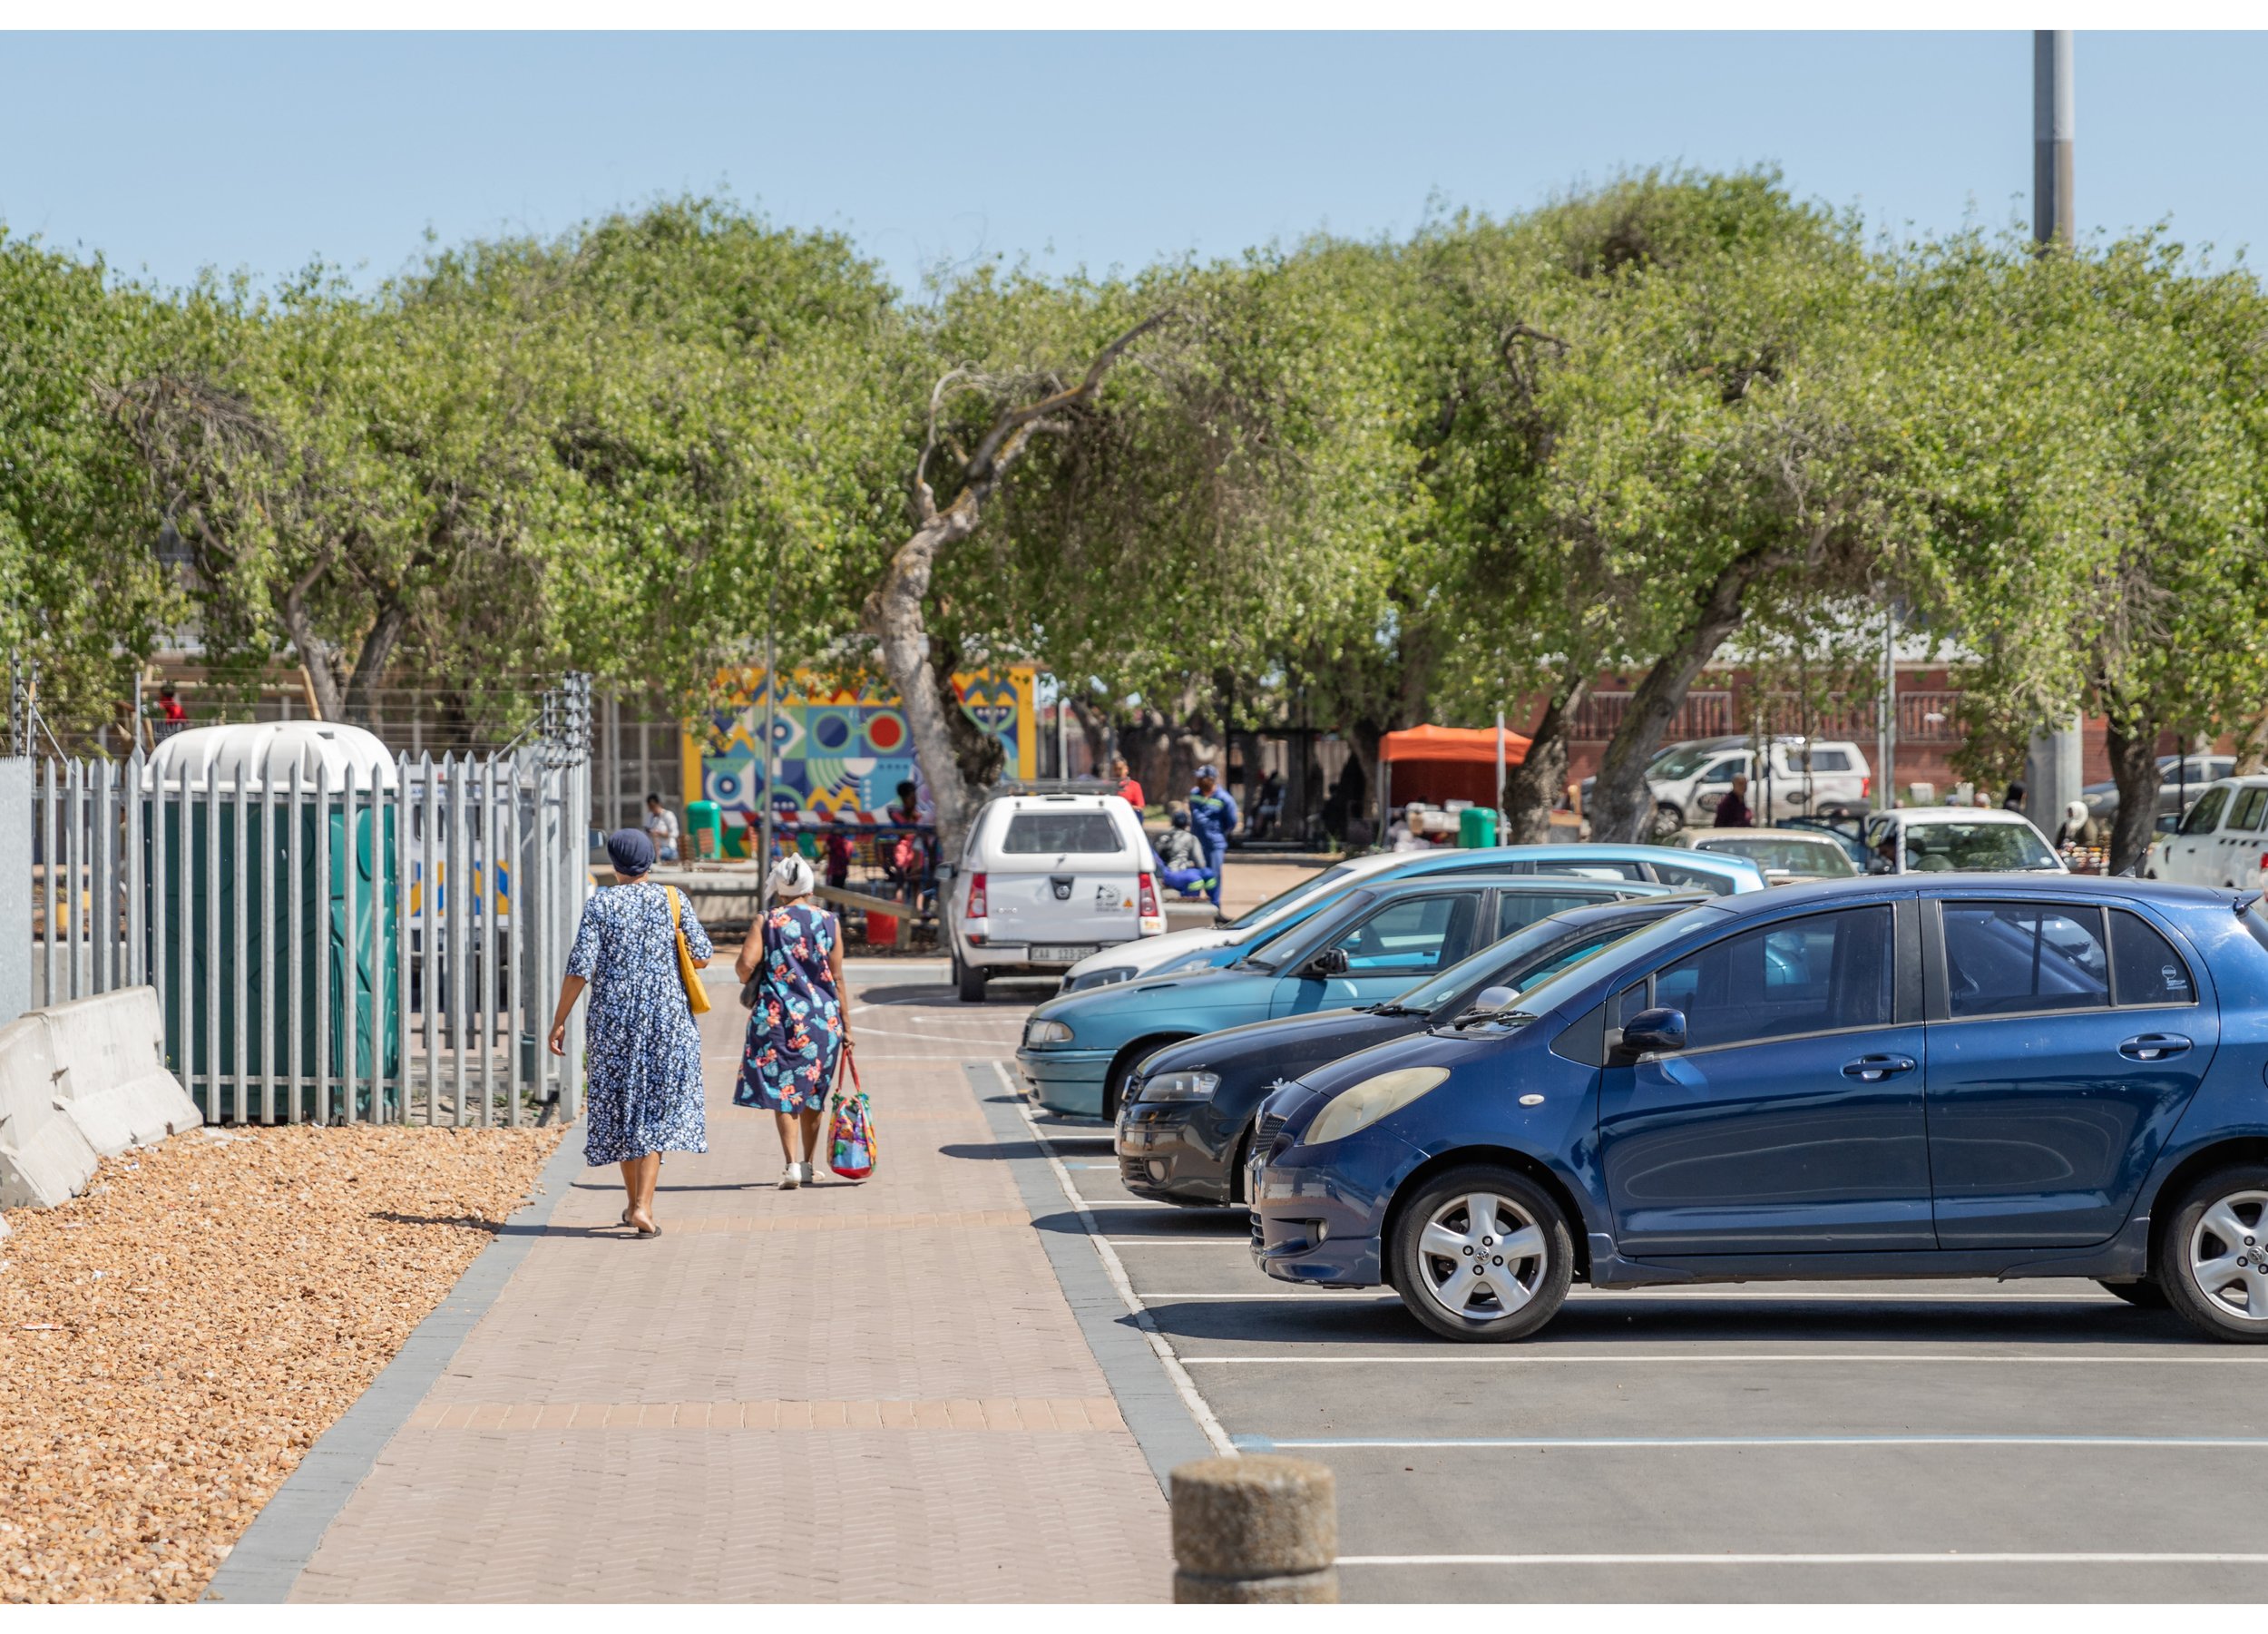  The Bonteheuwel Town Centre Upgrade project focuses on the revitalisation of Freedom Square, a historic public space consisting of the Bonteheuwel Civic, Bonteheuwel Library, the Old Staircase, and close surrounding areas. This project was initiated